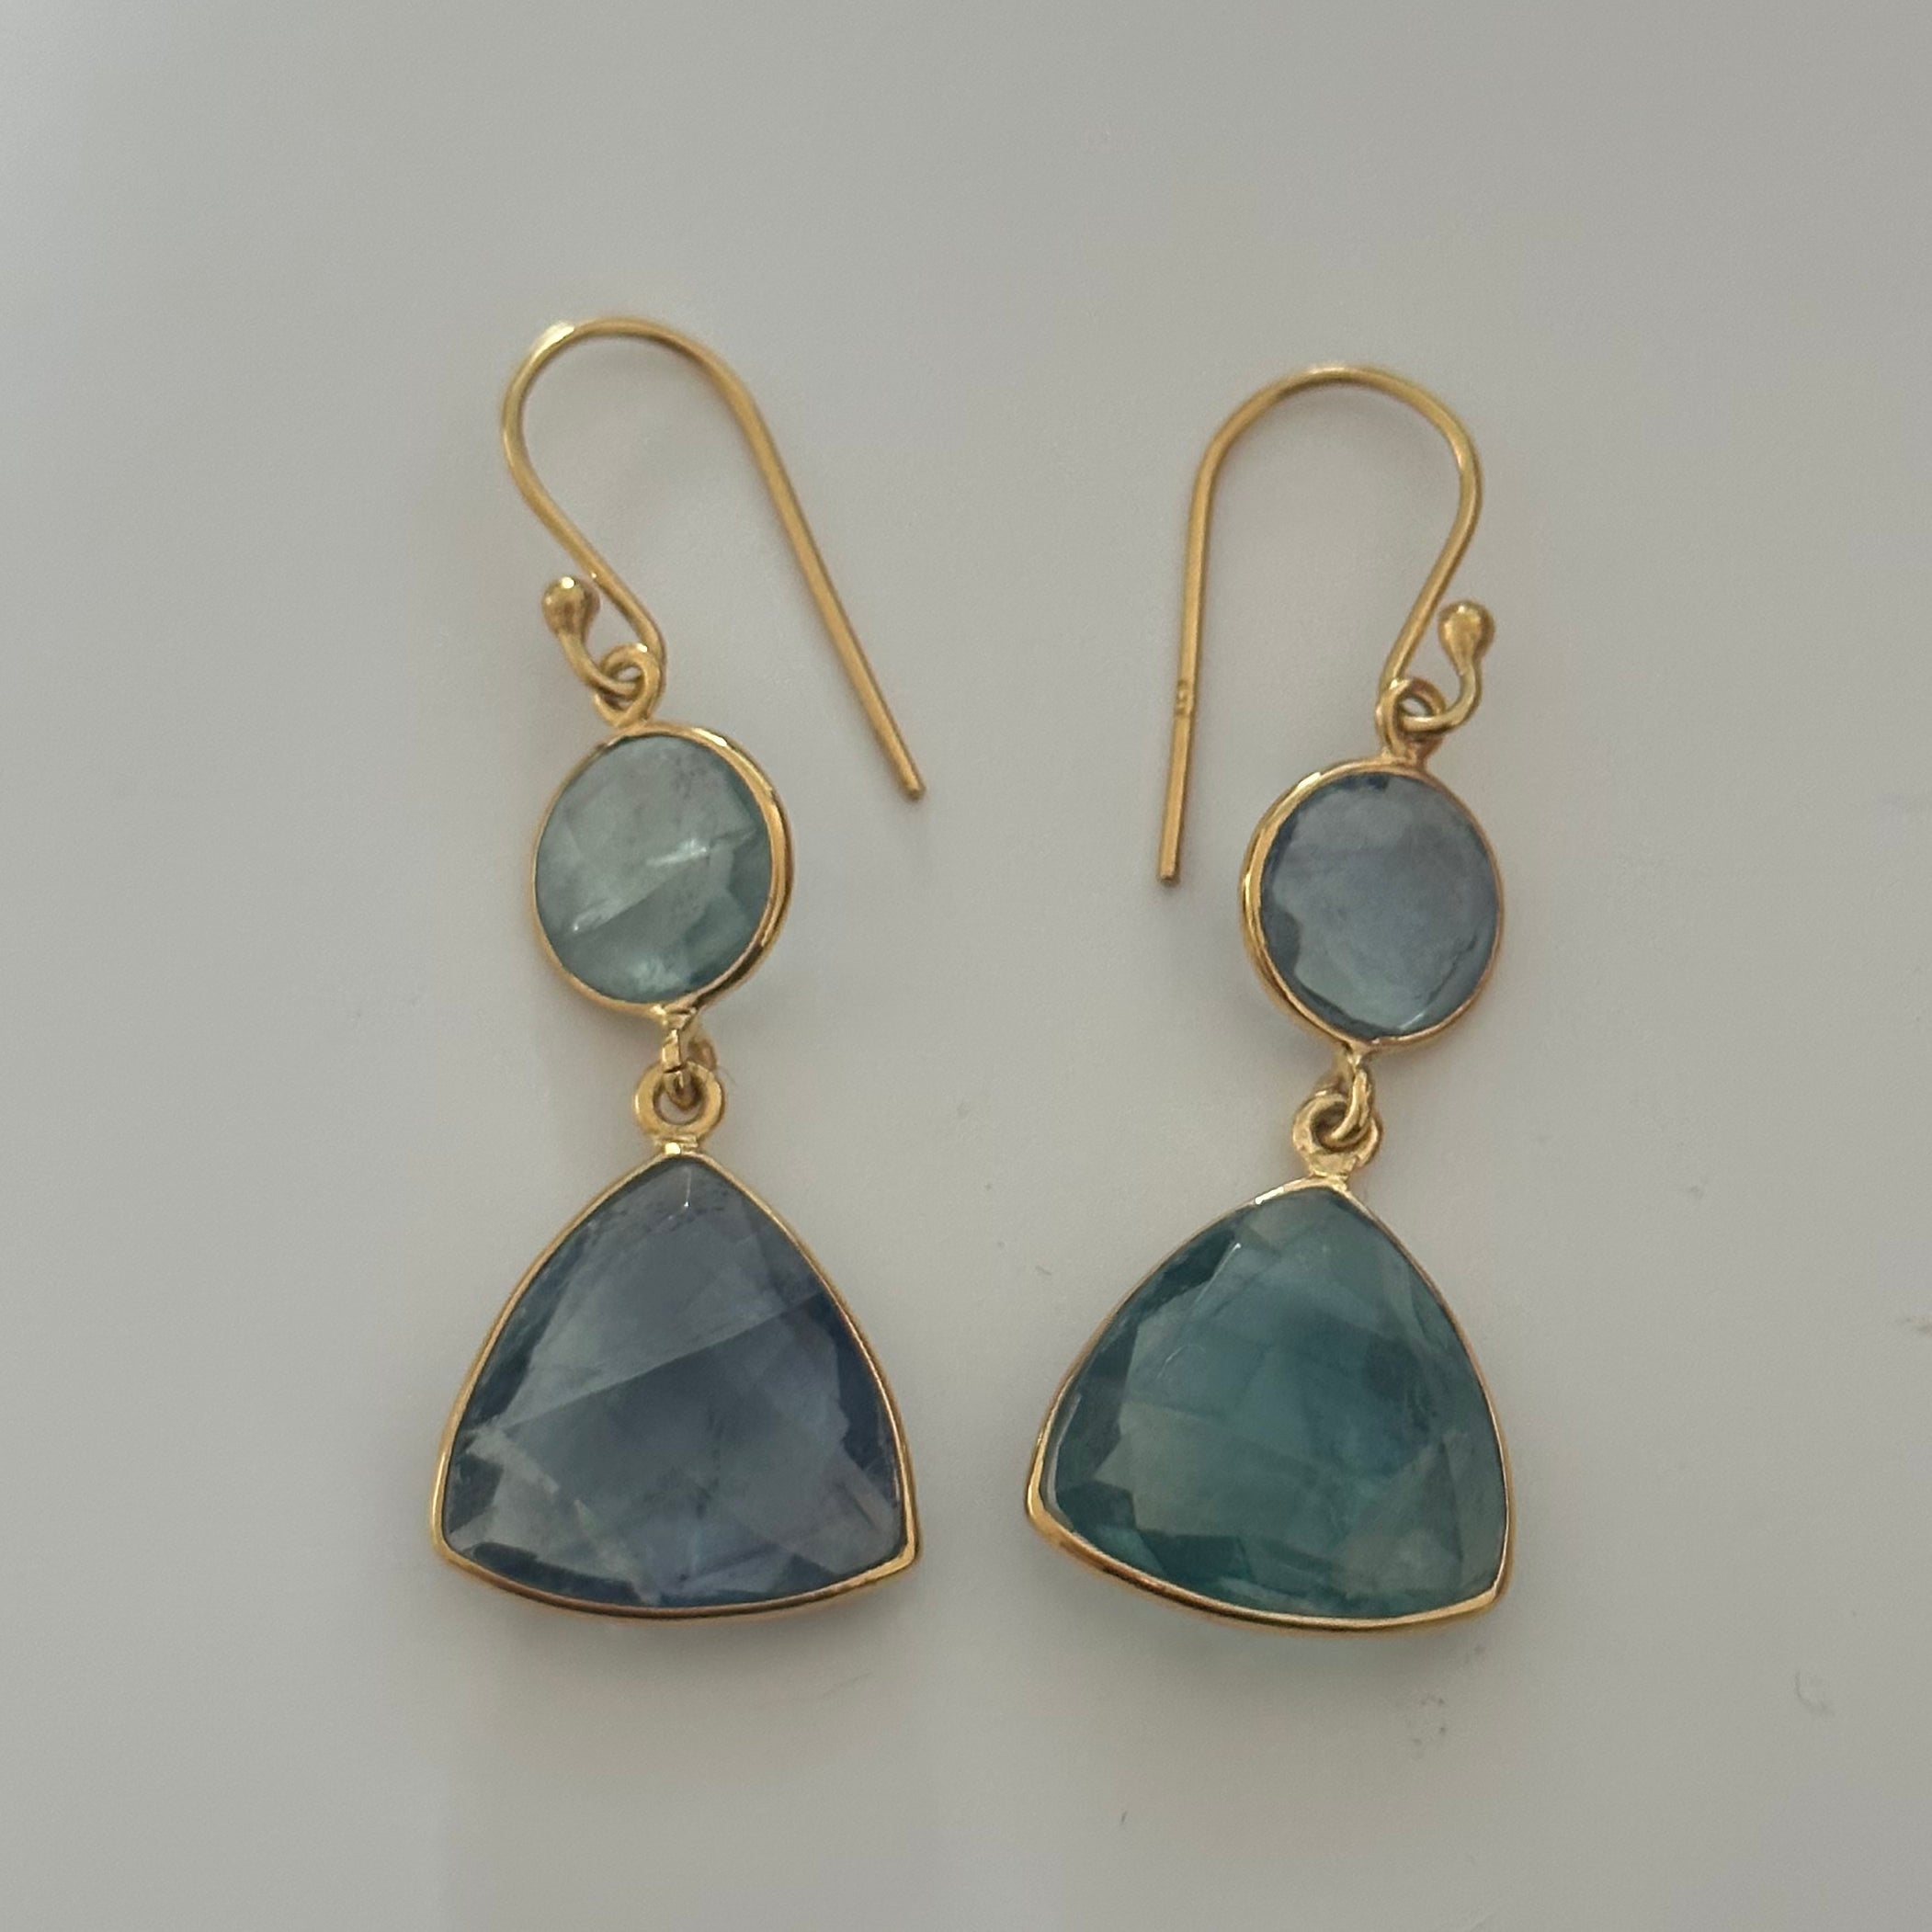 Apatite Gemstone Earrings in Gold Plated Sterling Silver - Triangular